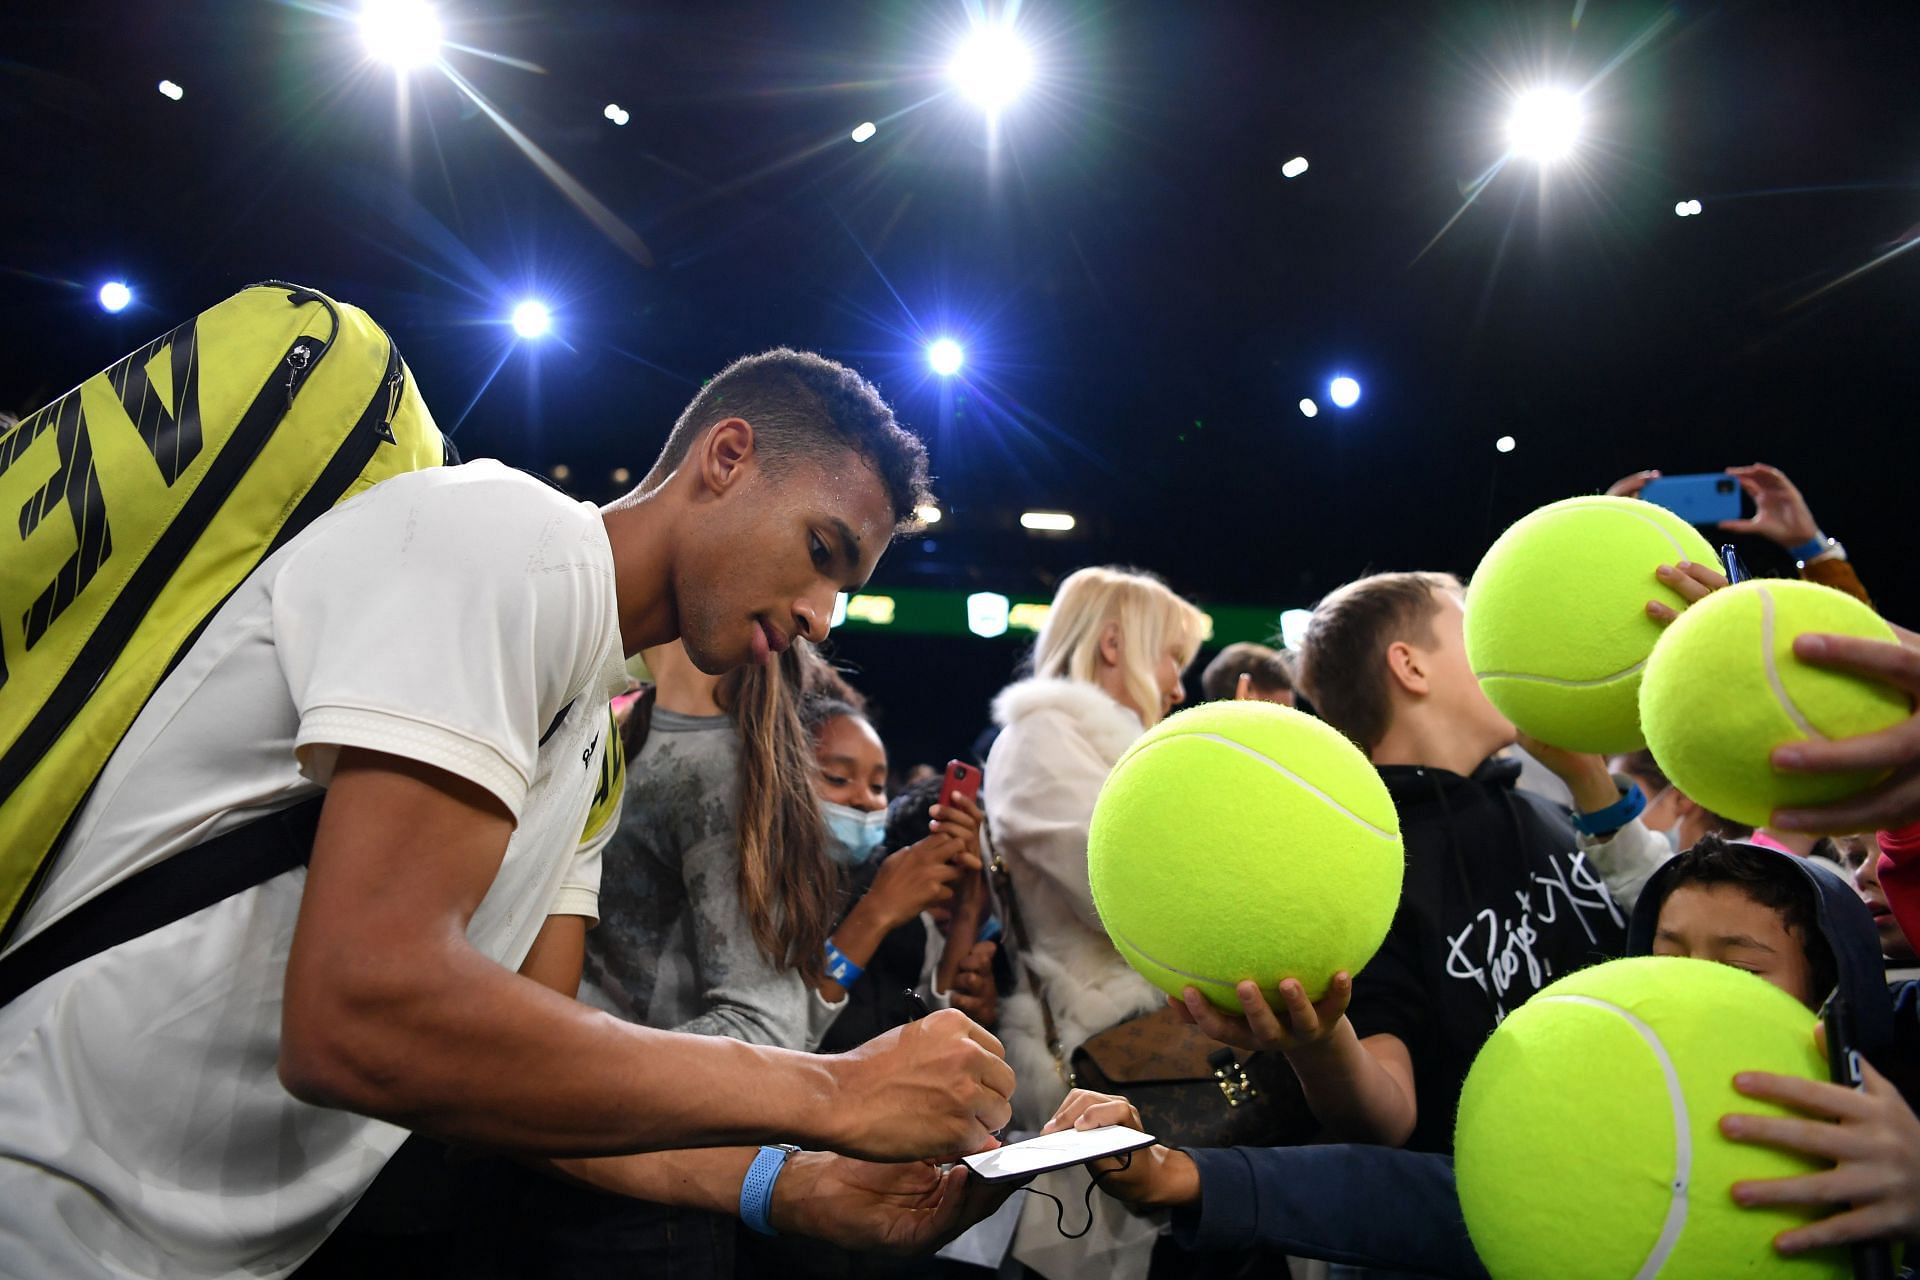 Felix Auger-Aliassime has been one of the breakout stars of the season